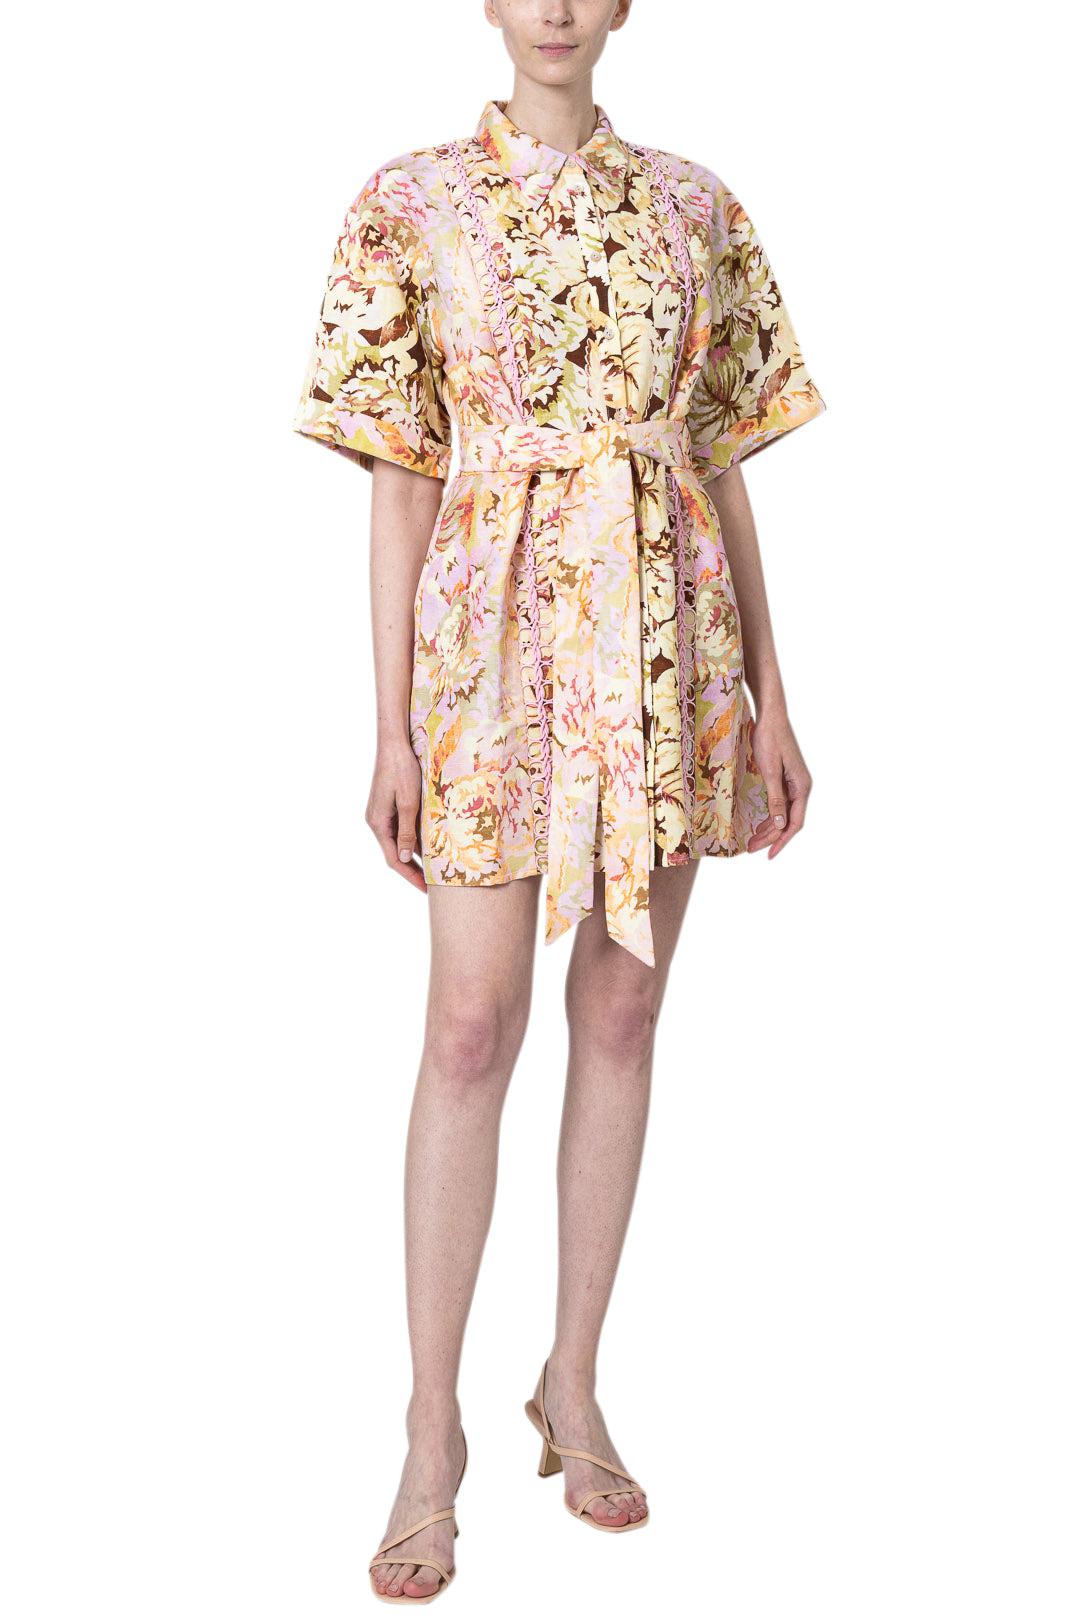 Significant Other-Nicole Shirt Dress-SS2401143D-PRT-dgallerystore